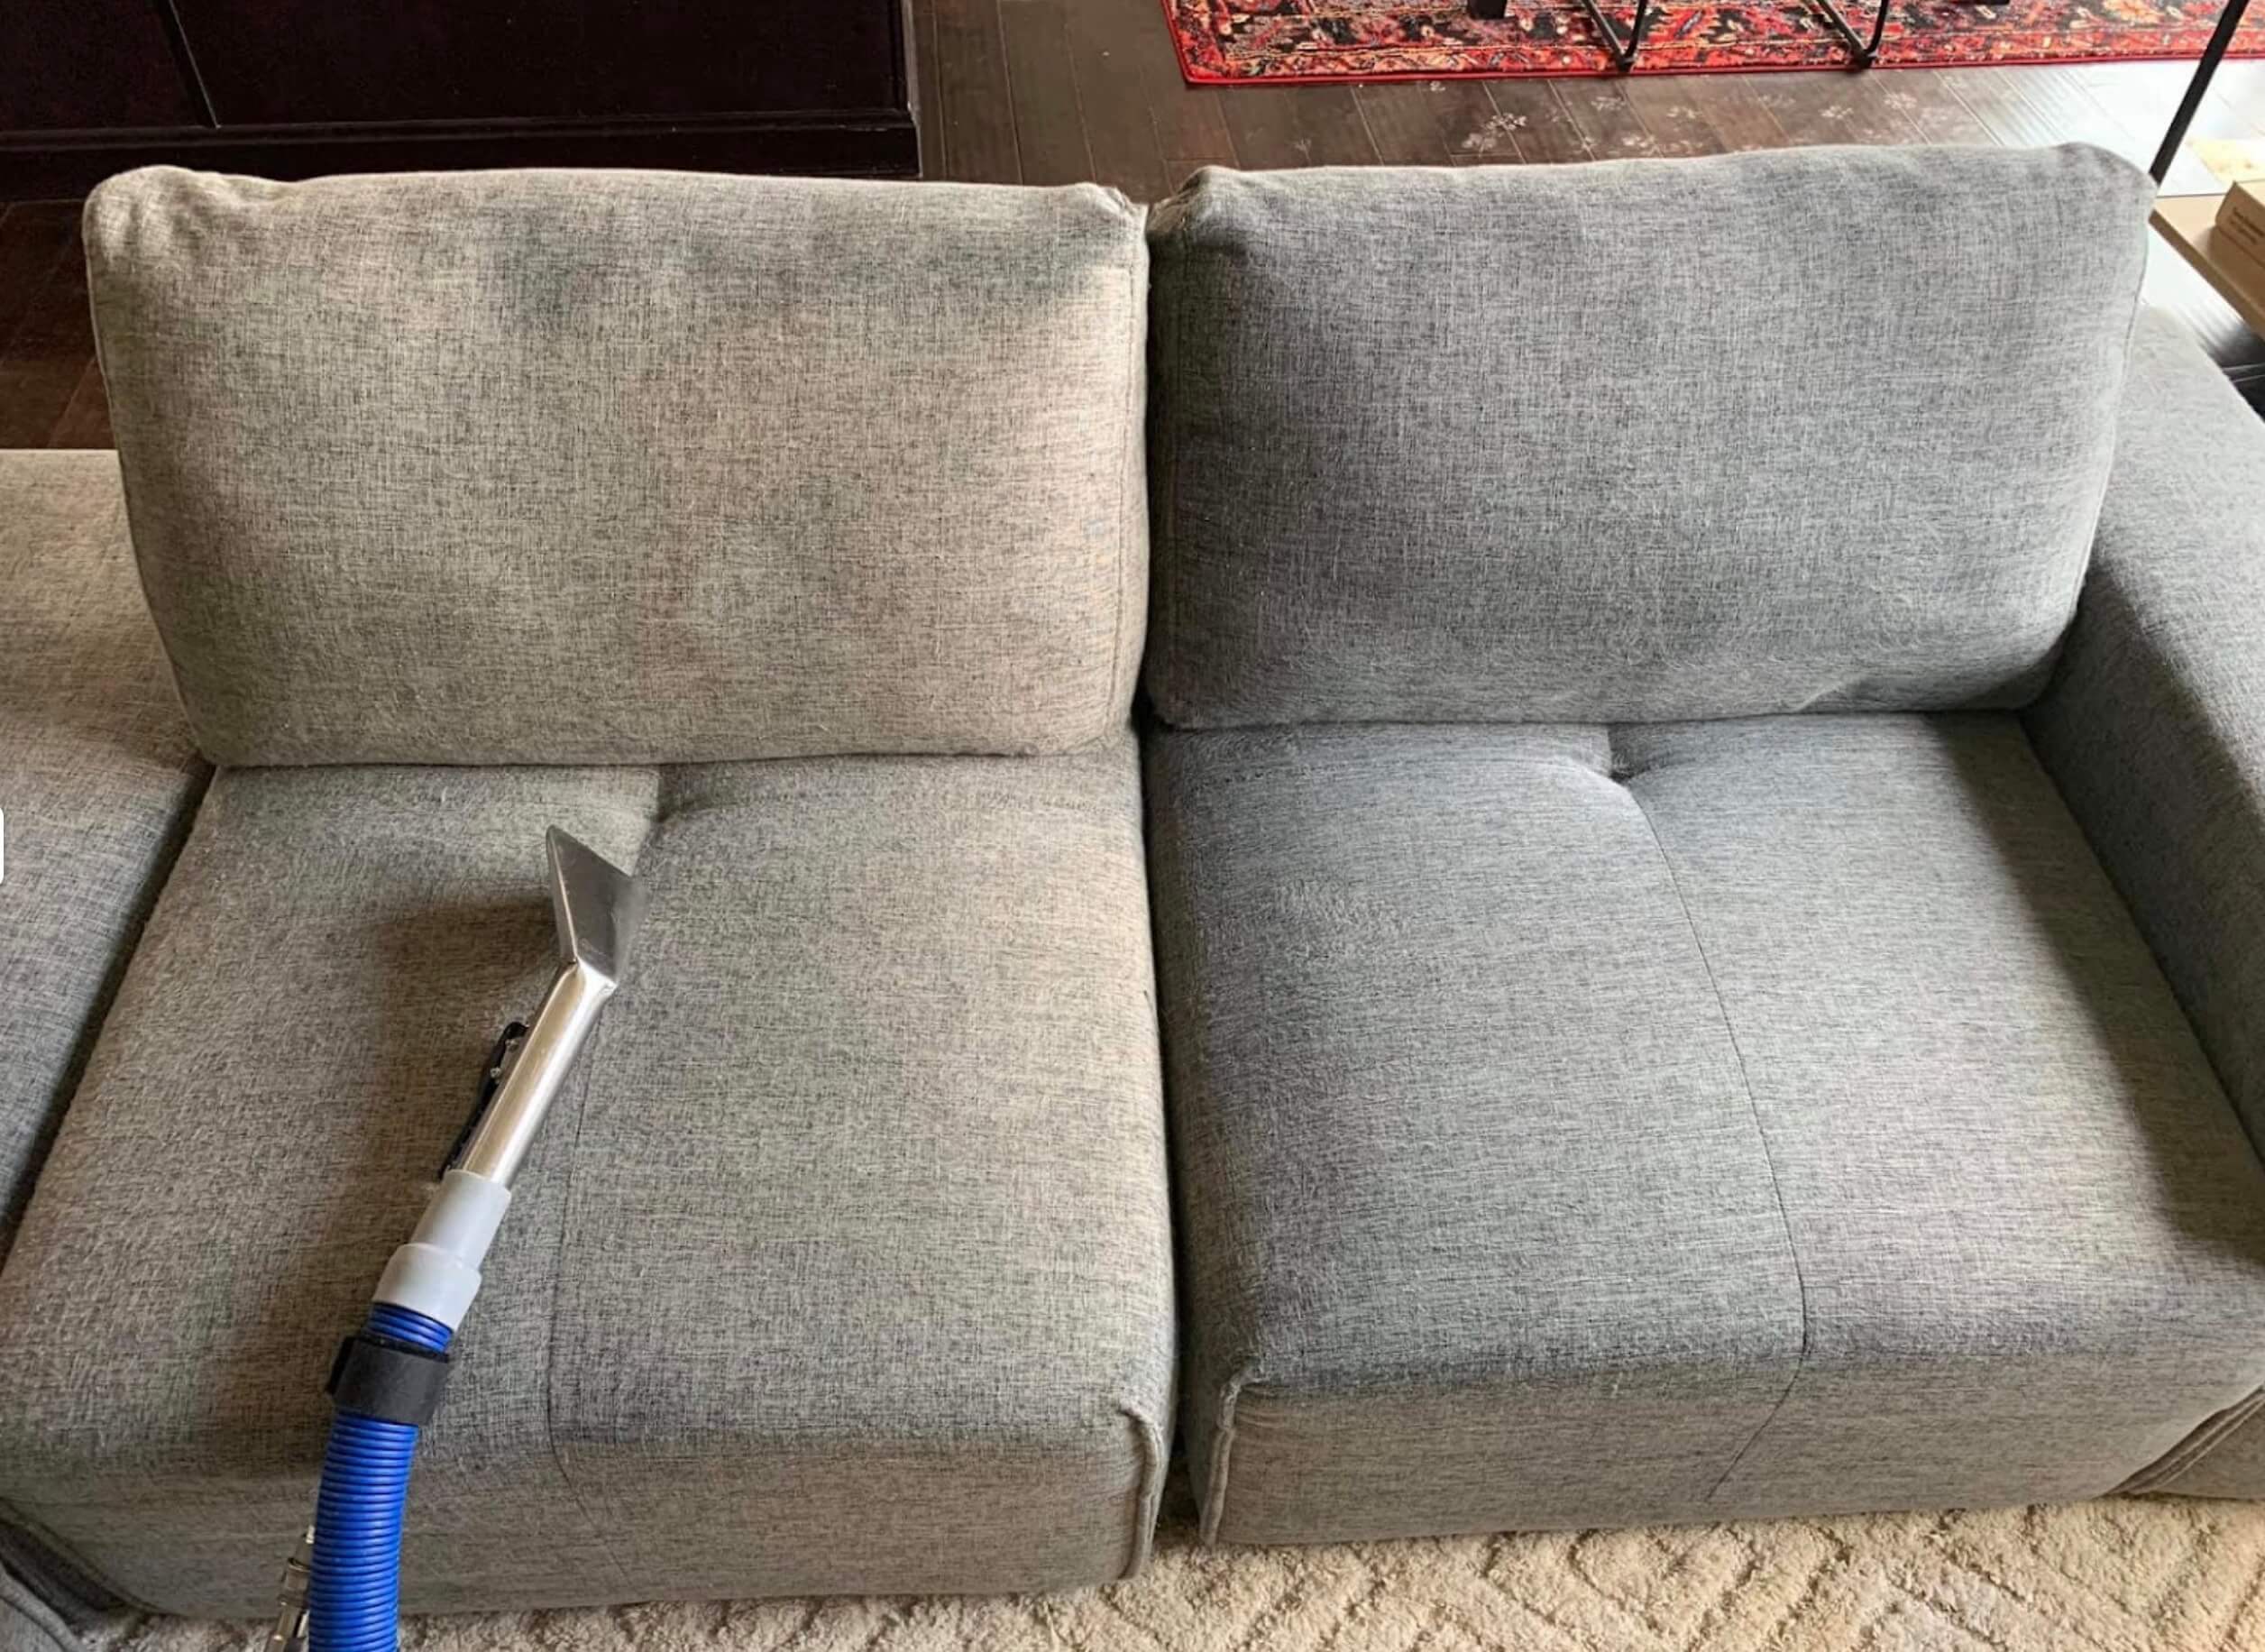 Steps To Clean Upholstery Stains Fastly